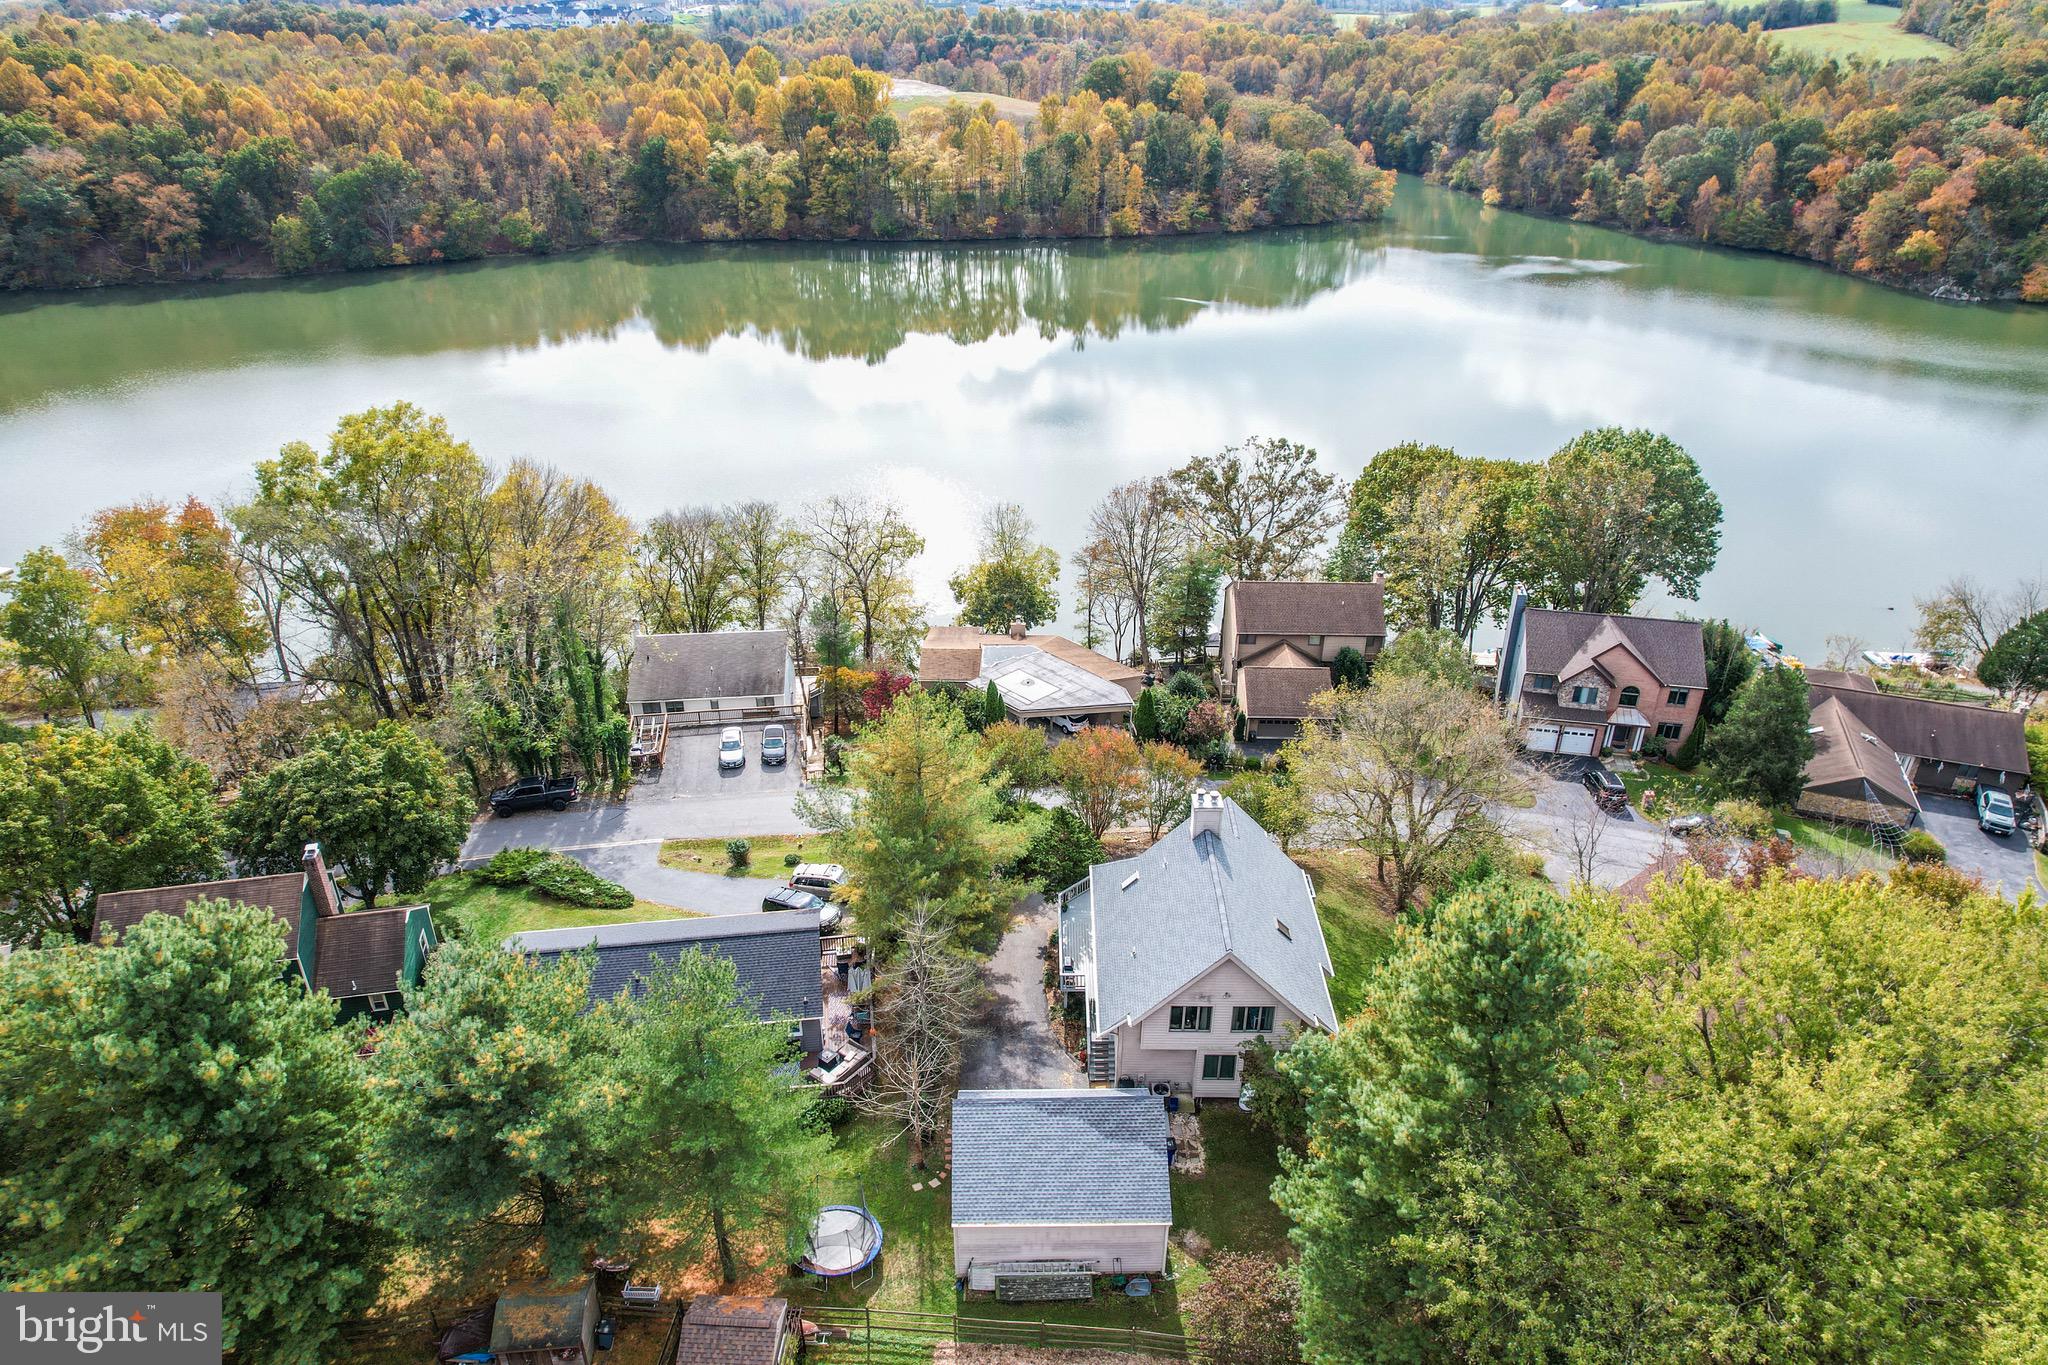 an aerial view of a house with garden space and lake view